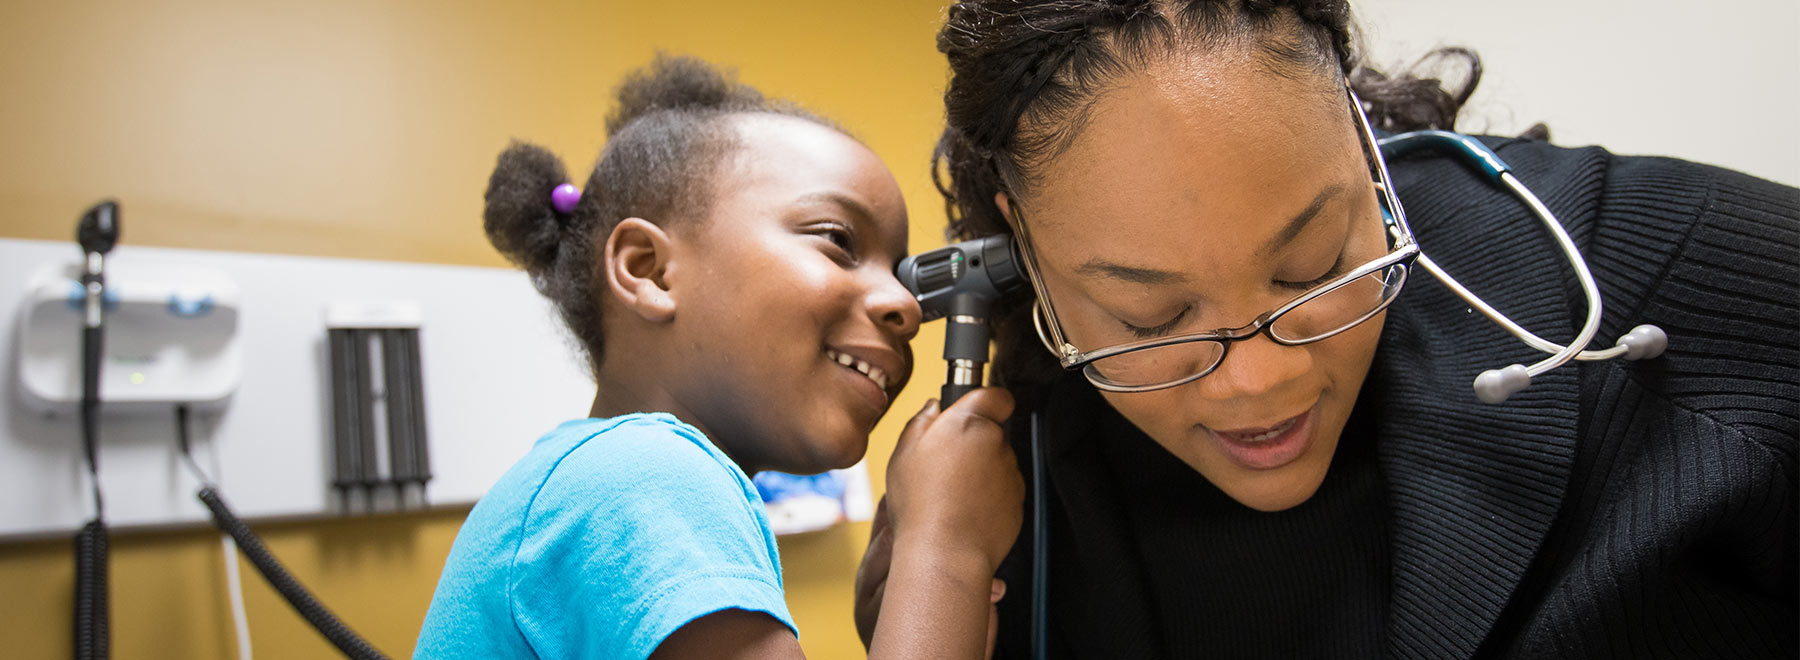 Child looking into provider's ear with scope.